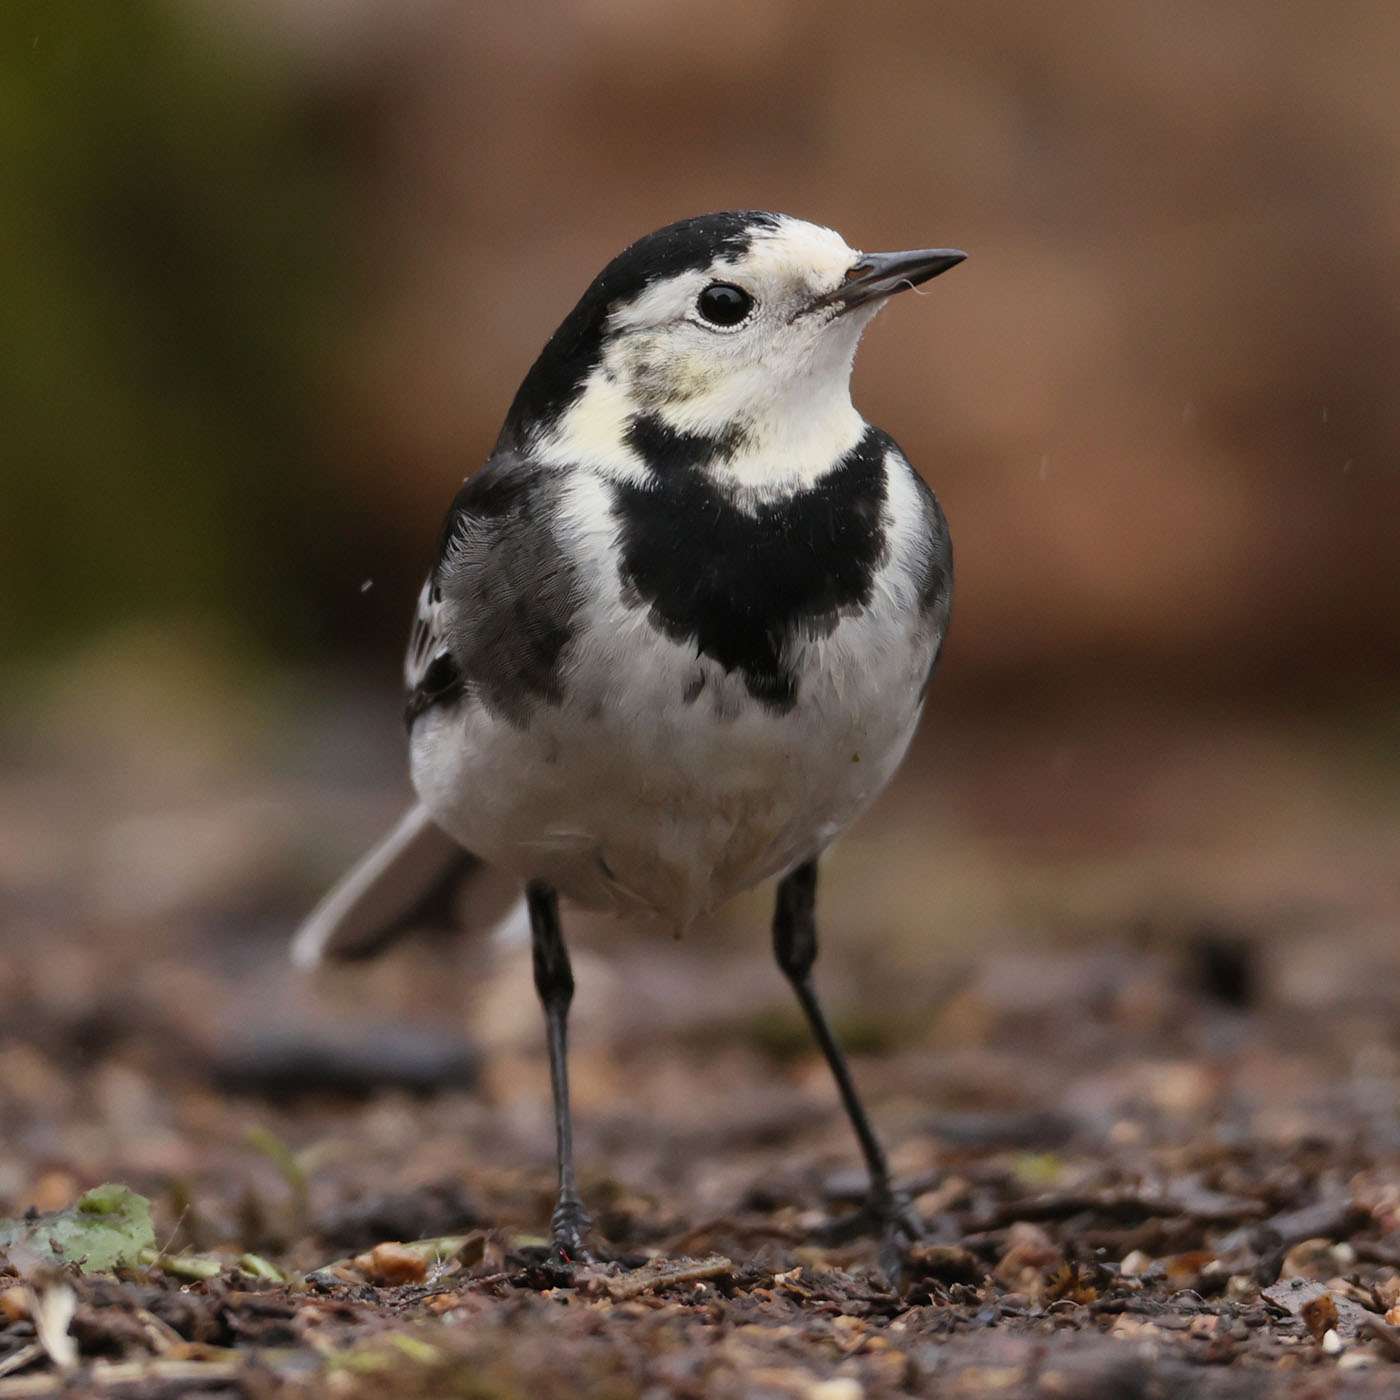 Pied Wagtail by Steve Hopper at South Brent